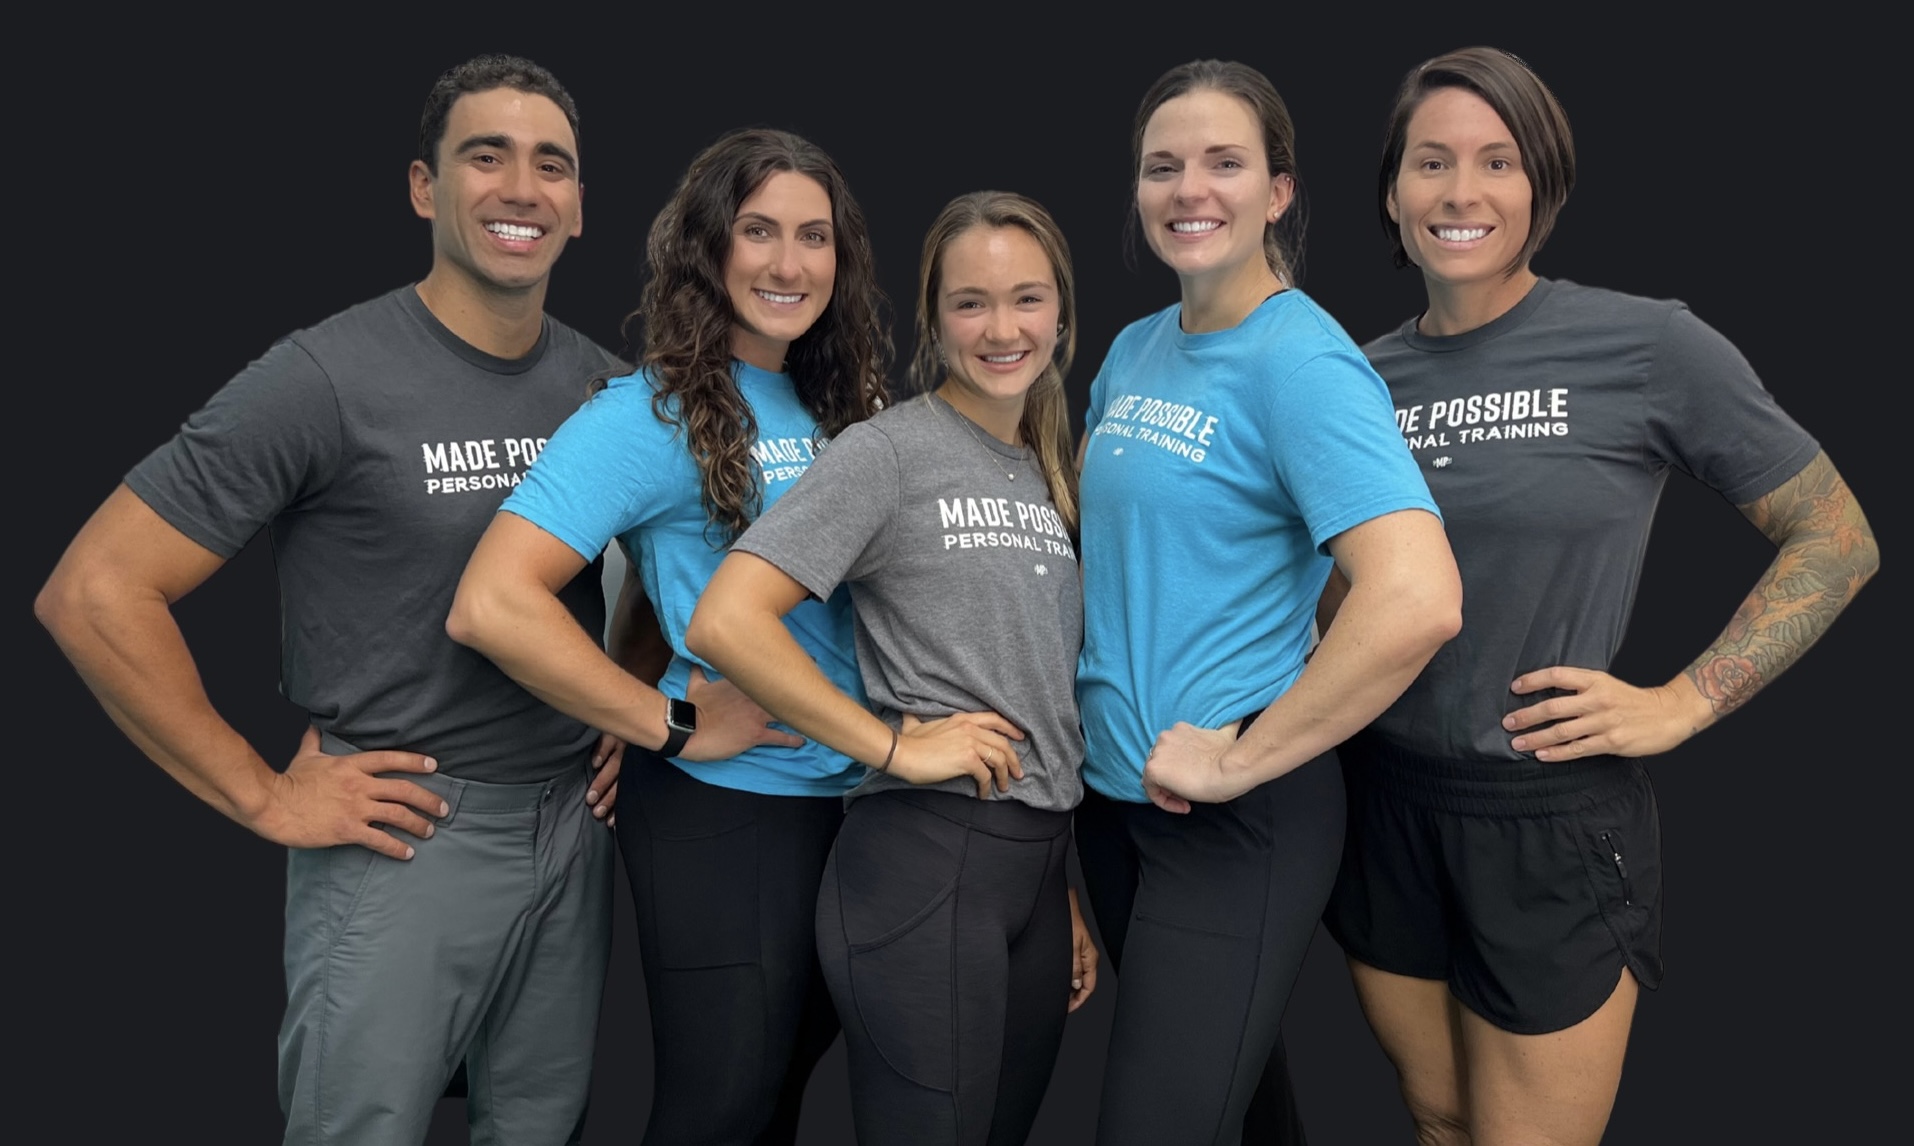 The Made Possible Personal Training Team